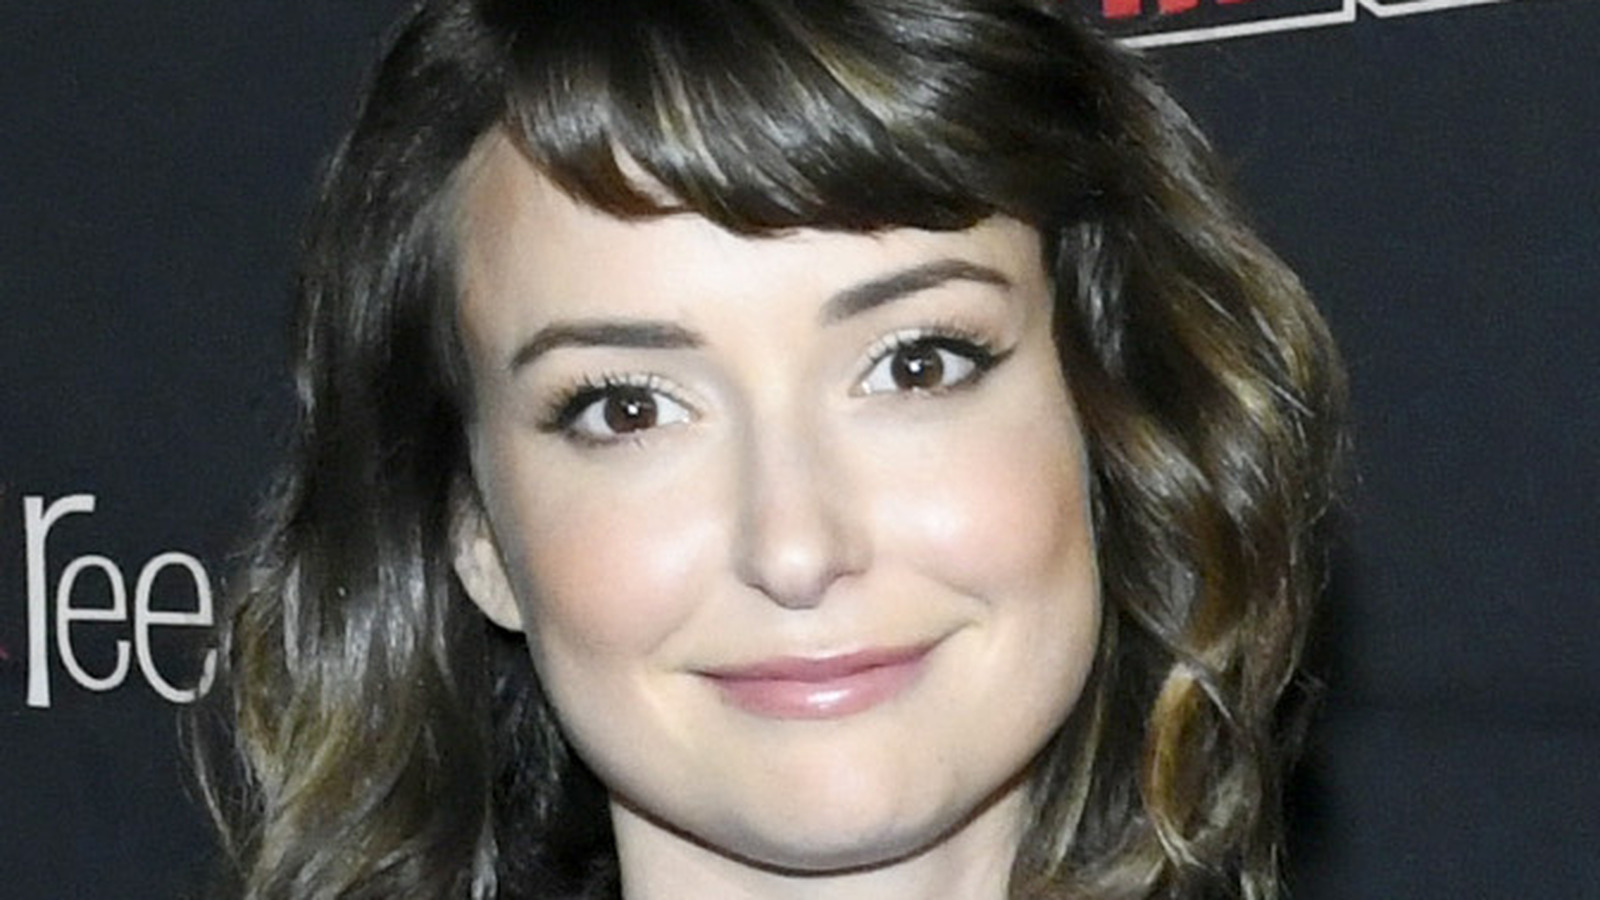 Milana Vayntrub: The Net Worth Of The AT&T Girl Might Surprise You